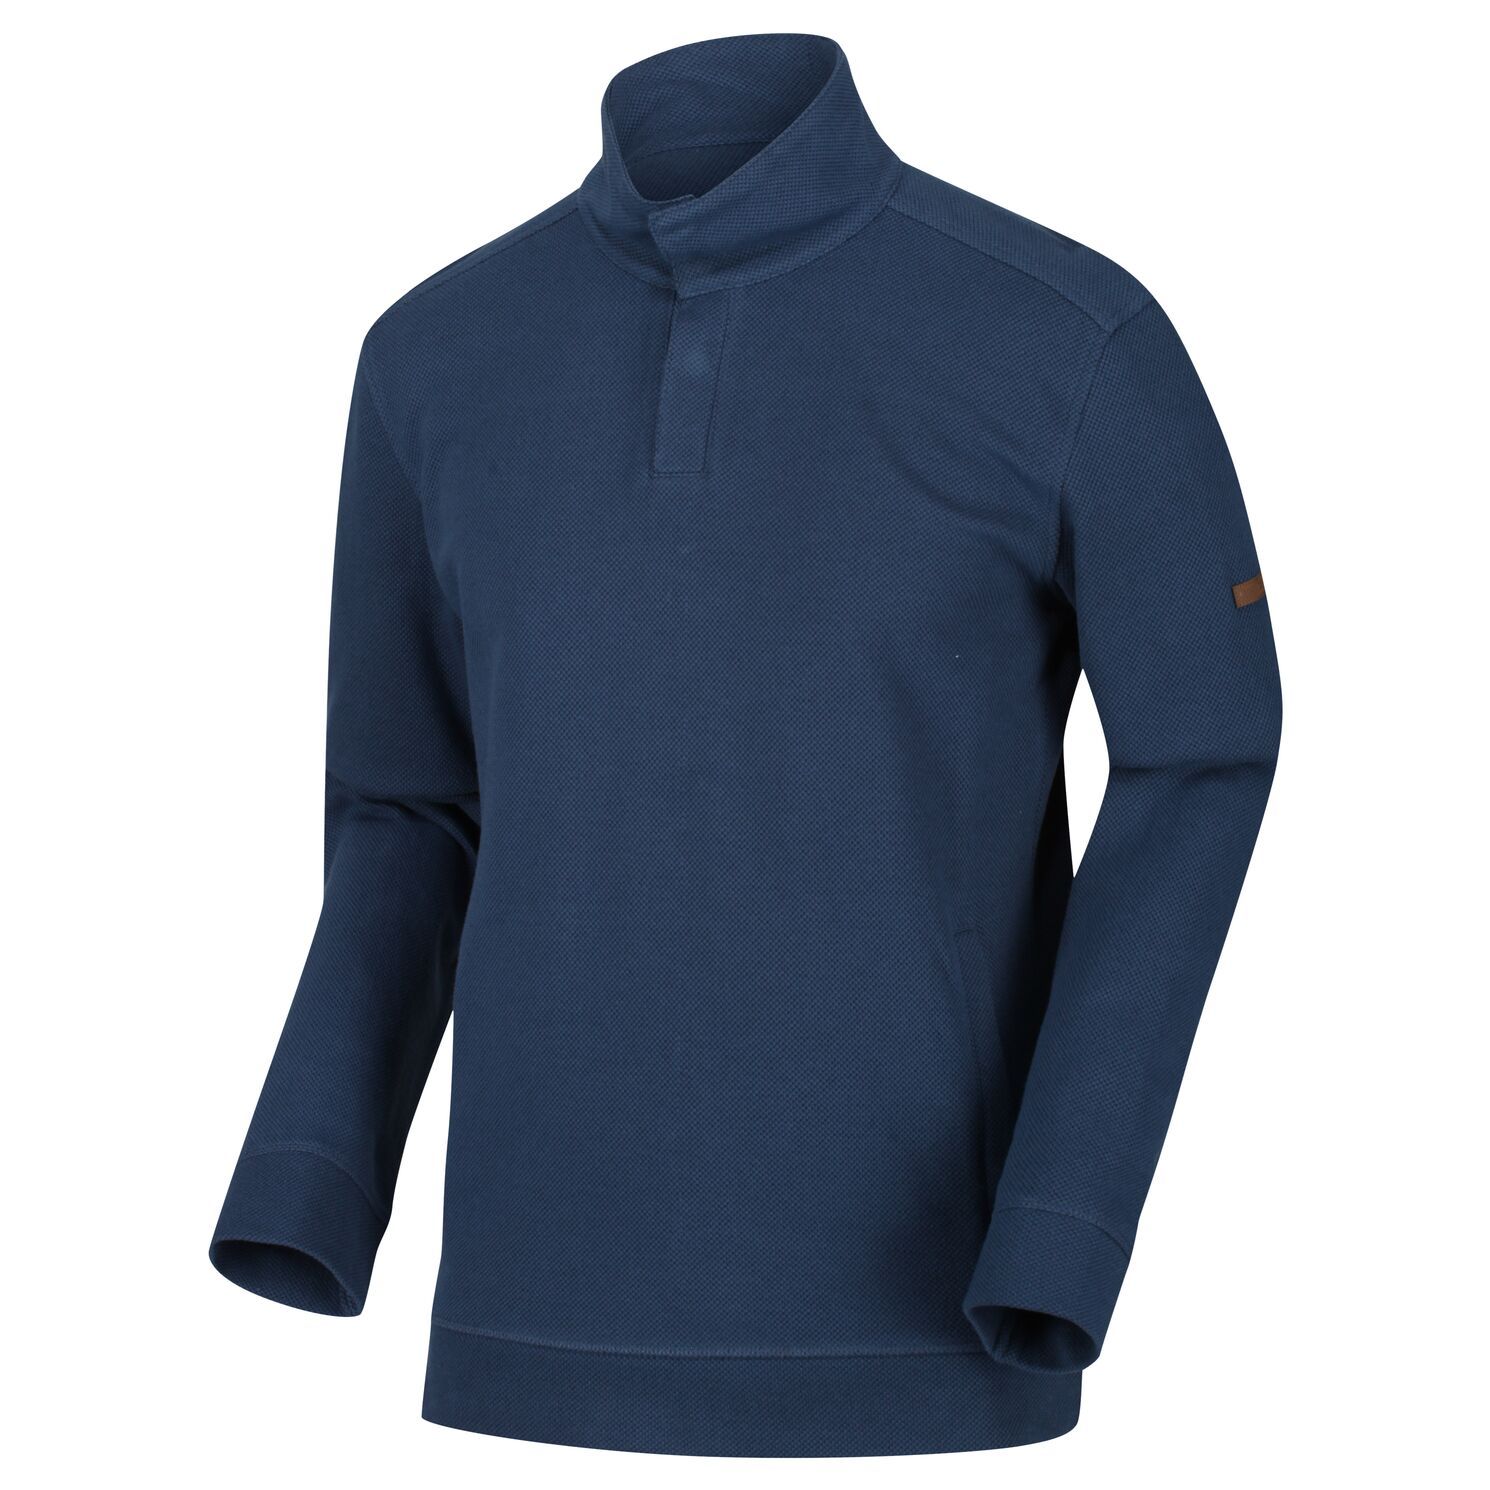 Material: 80% cotton, 20% polyester. Coolweave (67% cotton/33% polyester) stripe knit effect marl french terry fabric. Concealed snap fastening to placket. Lightly ribbed hem and cuffs. Subtle stripe effect pattern. Funnel neck collar. Chest sizes to fit: (S): 94-96.5cm, (M): 99-101.5cm, (L): 104-106.5cm, (XL): 109-112cm, (XXL): 117-122cm, (3XL): 124.5-129.5cm.